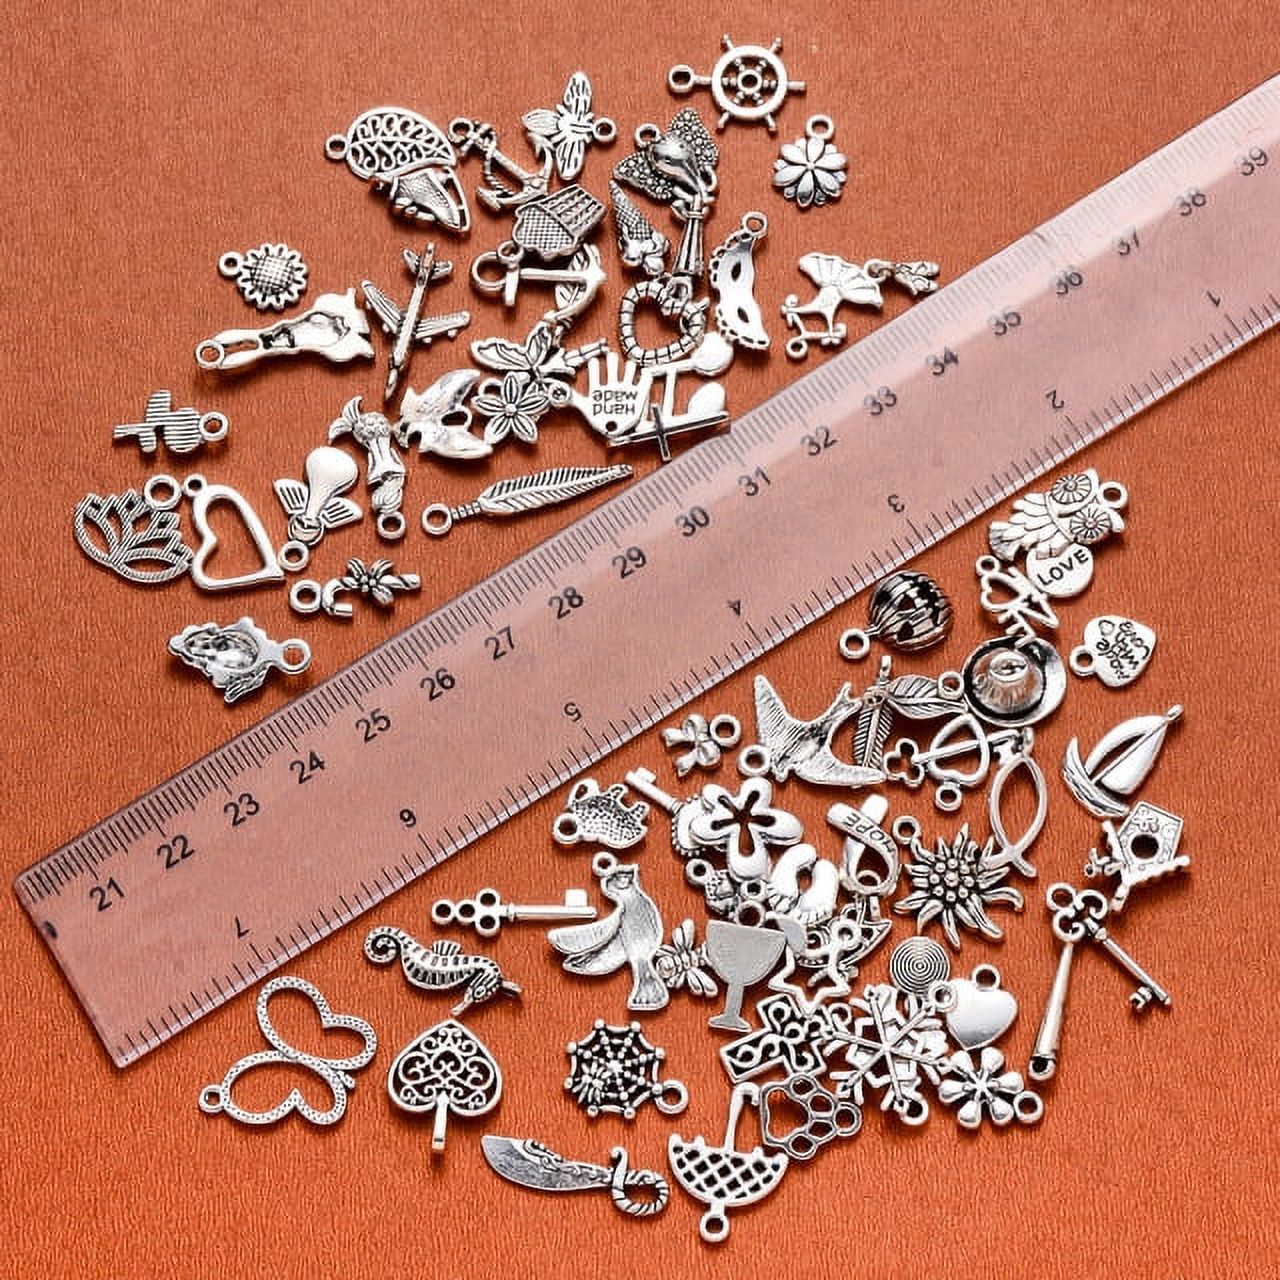 Pack of 100 Mixed Charms Silver DIY Charms Pendants for Crafting, Jewelry  Making Accessory